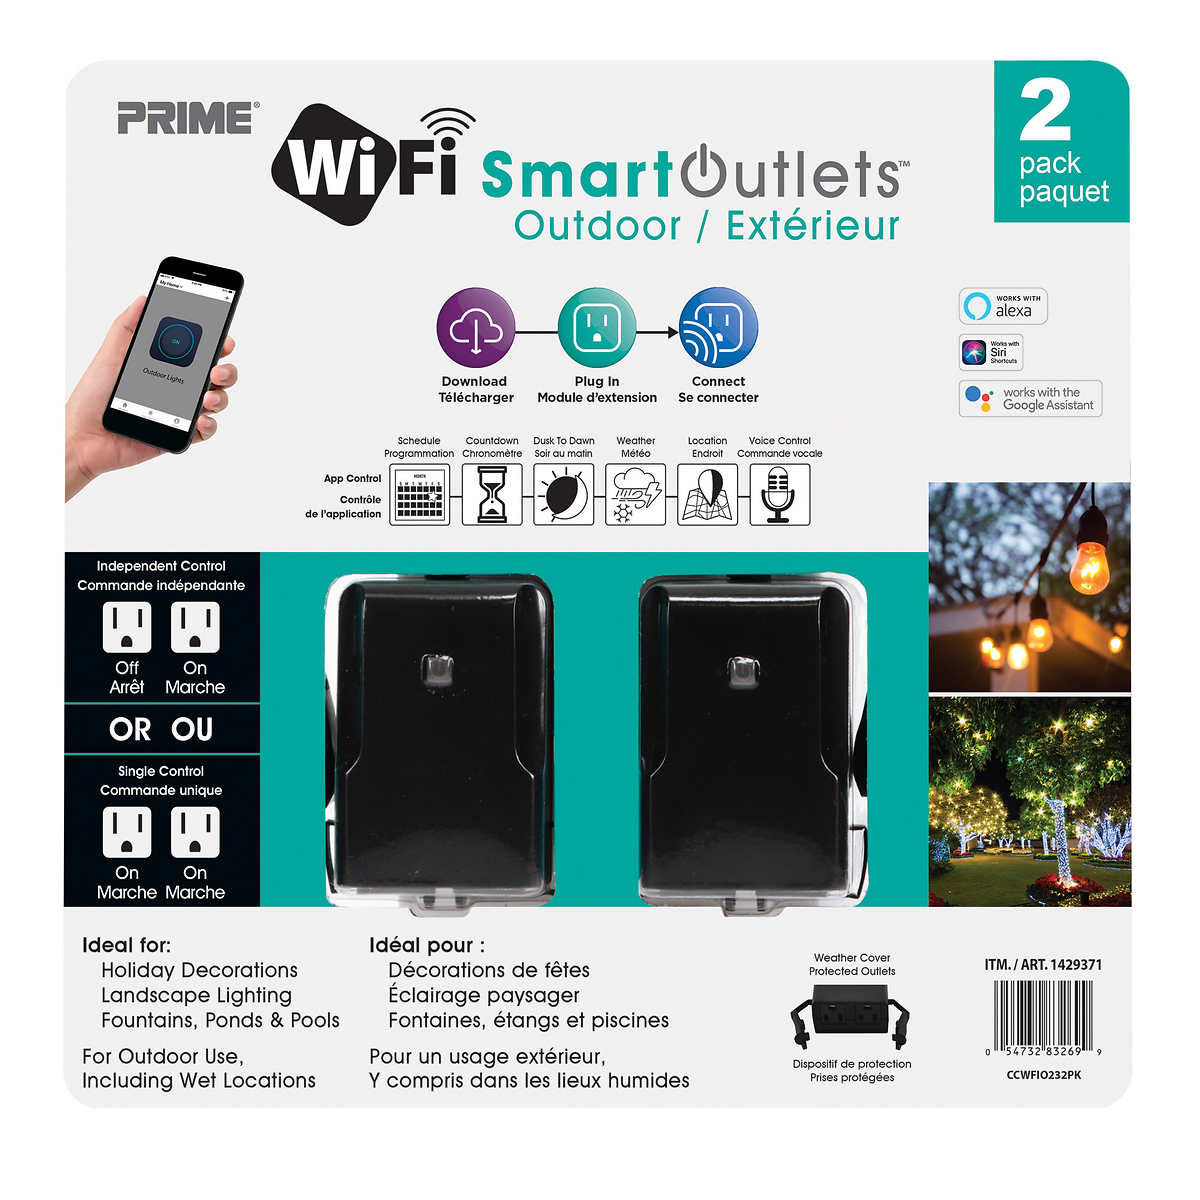 Indoor Wi-Fi Controlled Outlet — Prime Wire & Cable Inc.